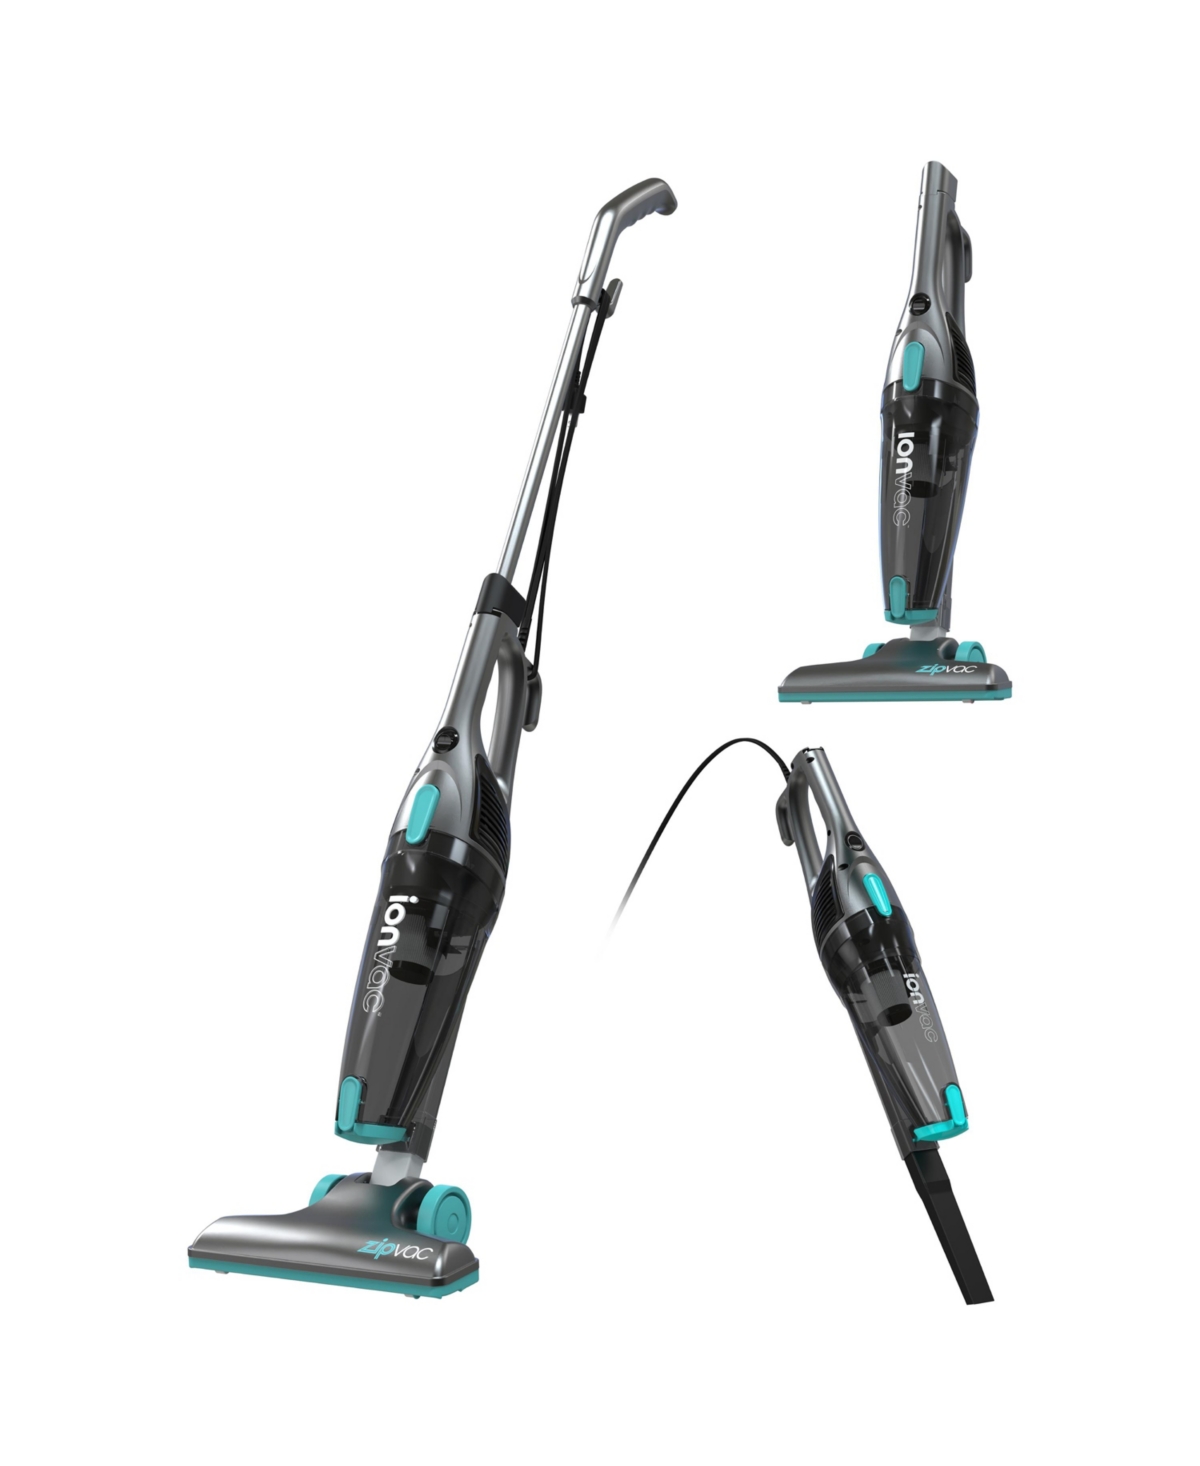 BISSELL 3 in 1 Lightweight Corded Stick Vacuum Turquoise New In Box